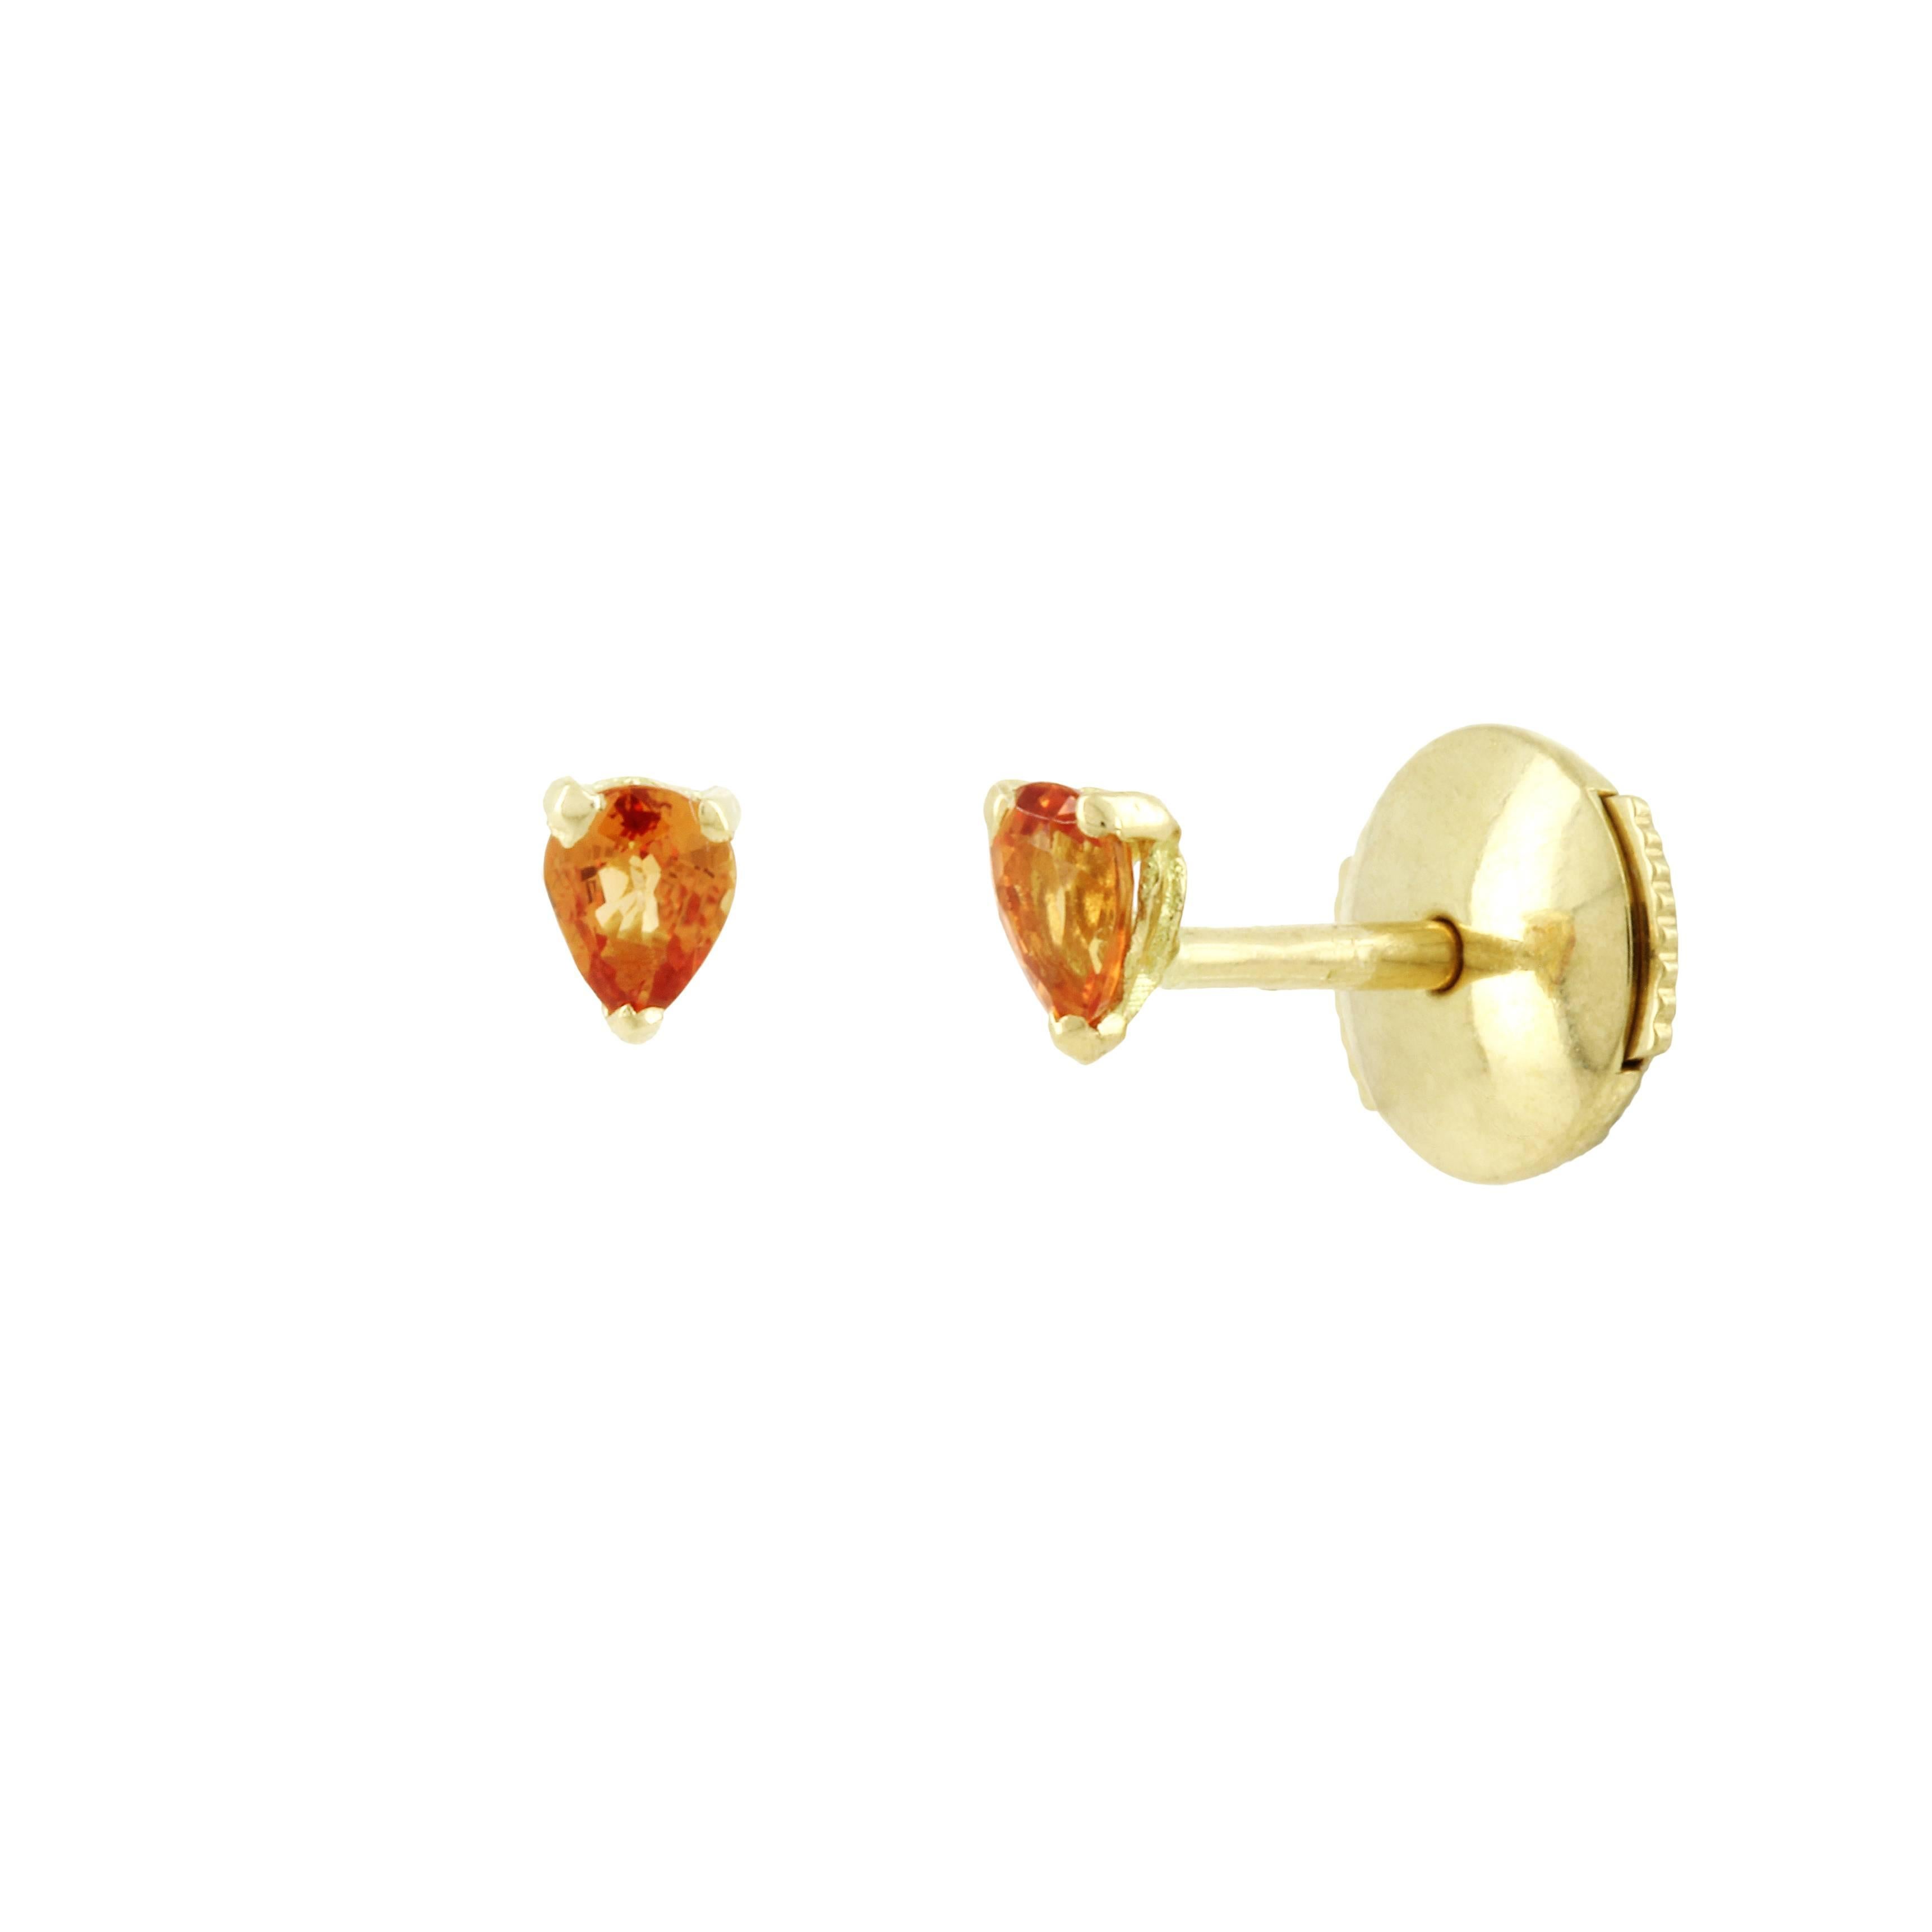 Stud in gold 18 carats 0,6gr, Orange sapphire 0,10 carats approx.
Ear-jacket in gold 18 carats 1,2gr, Multicolored Sapphires 0,50 carats approx.
Alpa System
Sold by unit